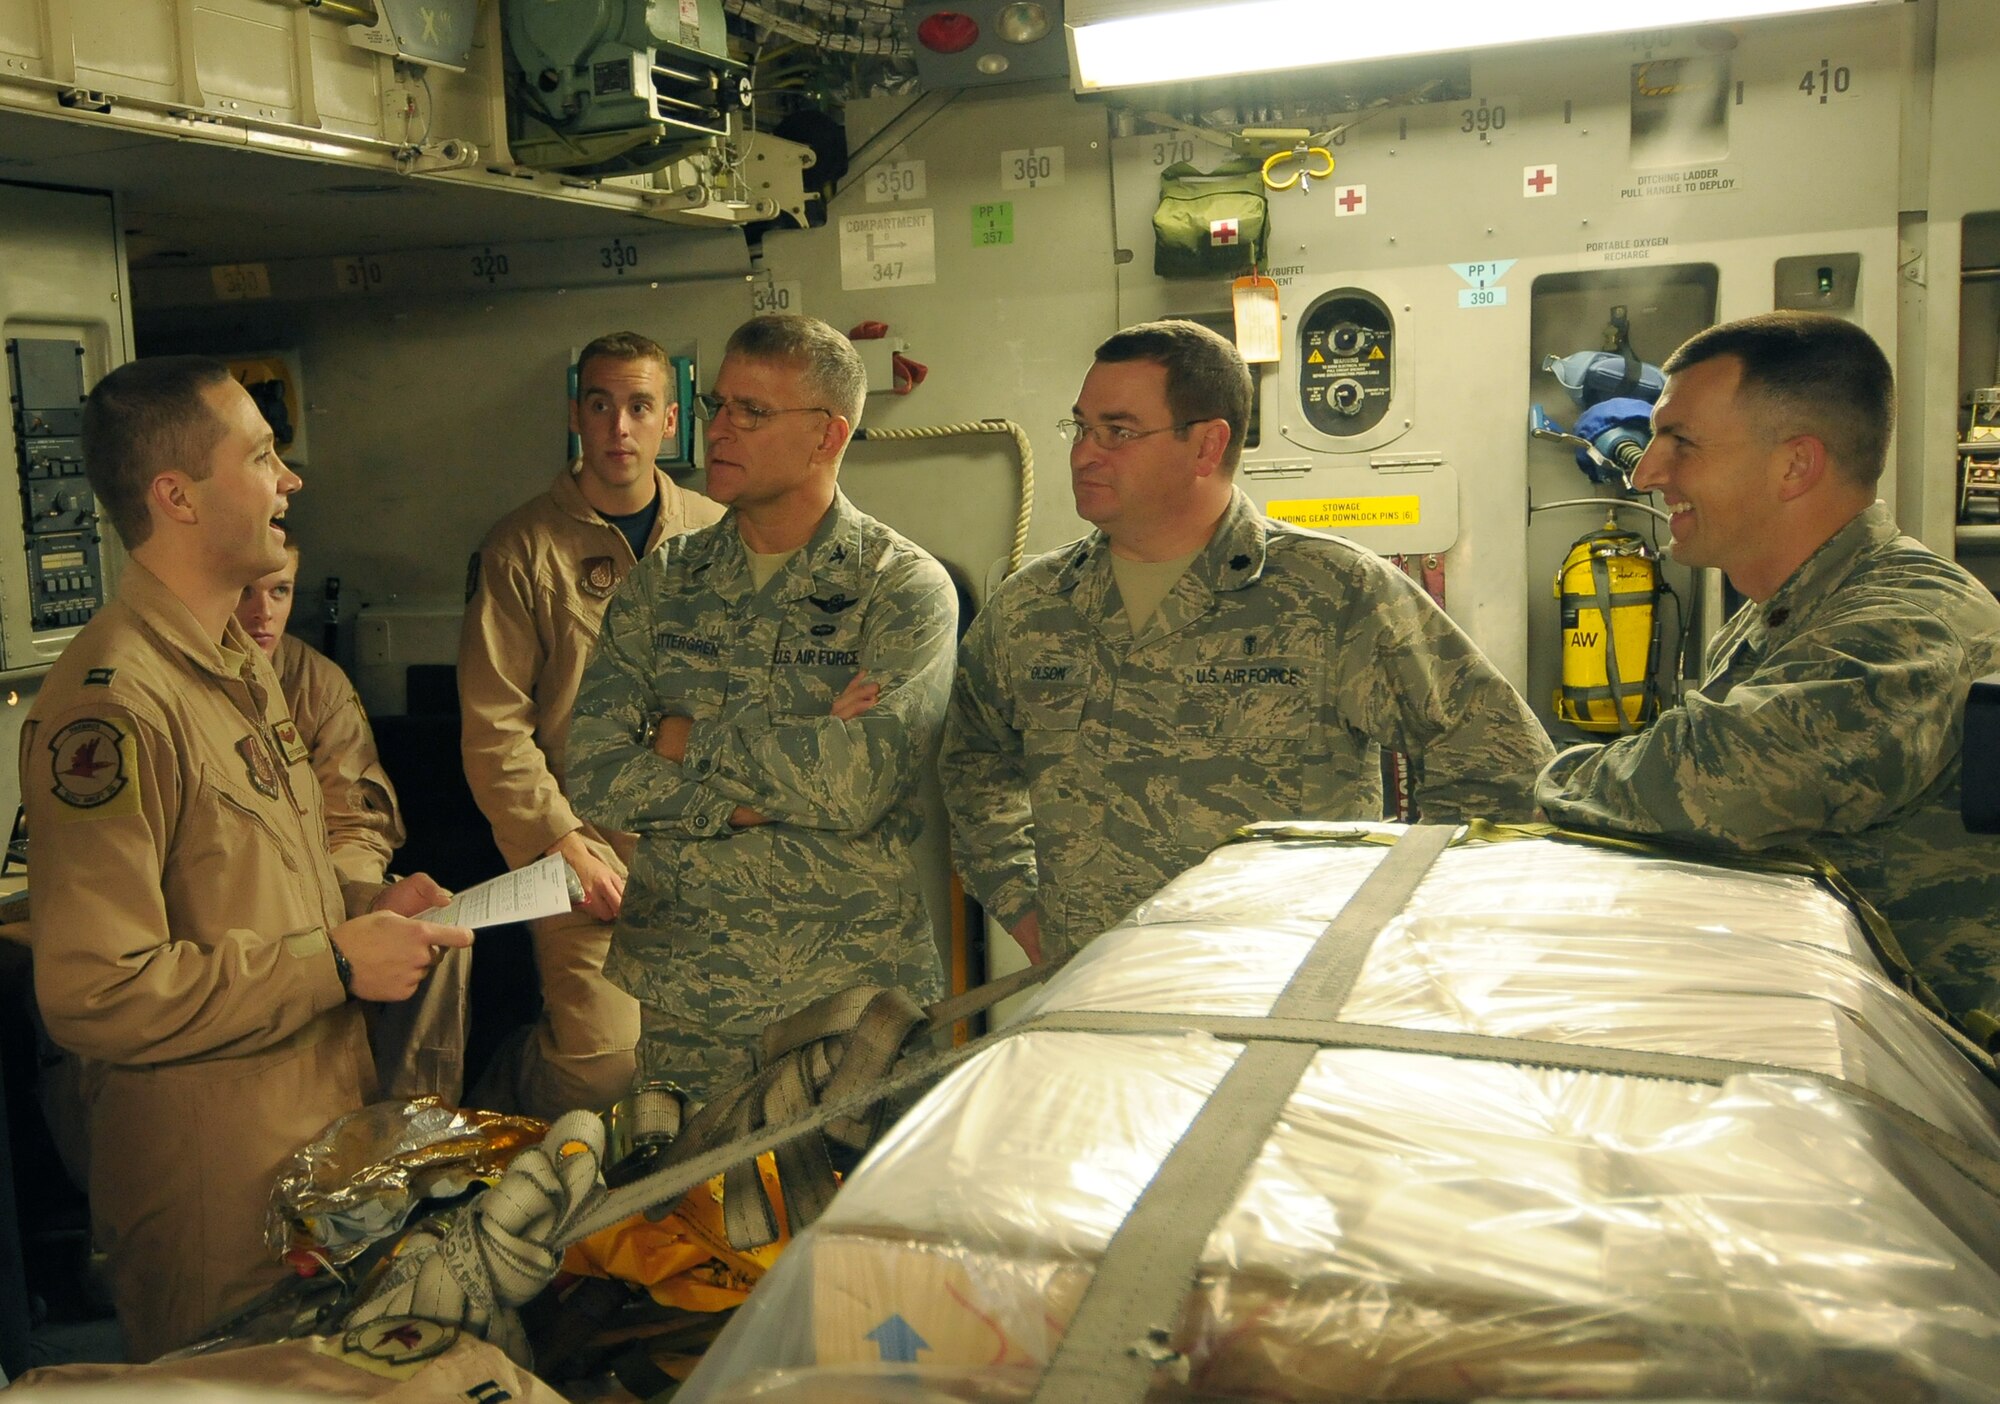 YOKOTA AIR BASE, Japan -- Capt. Jeff Pedersen, a C-17 aircraft commander from Elmendorf Air Force Base, Alaska, (left) briefs the leadership of an Air Force Humanitarian Assistance Rapid Response Team and a seven-person mobile field surgical team here Oct. 5 before the team's departure en route to Padang, Indonesia, to provide medical care to those affected by the recent 7.6-magnitude earthquake. The C-17  crew transported the team and 13 pallets of equipment necessary to support the team, which is self-sustaining for up to five days. (U.S. Air Force photo/Airman 1st Class Sean Martin)